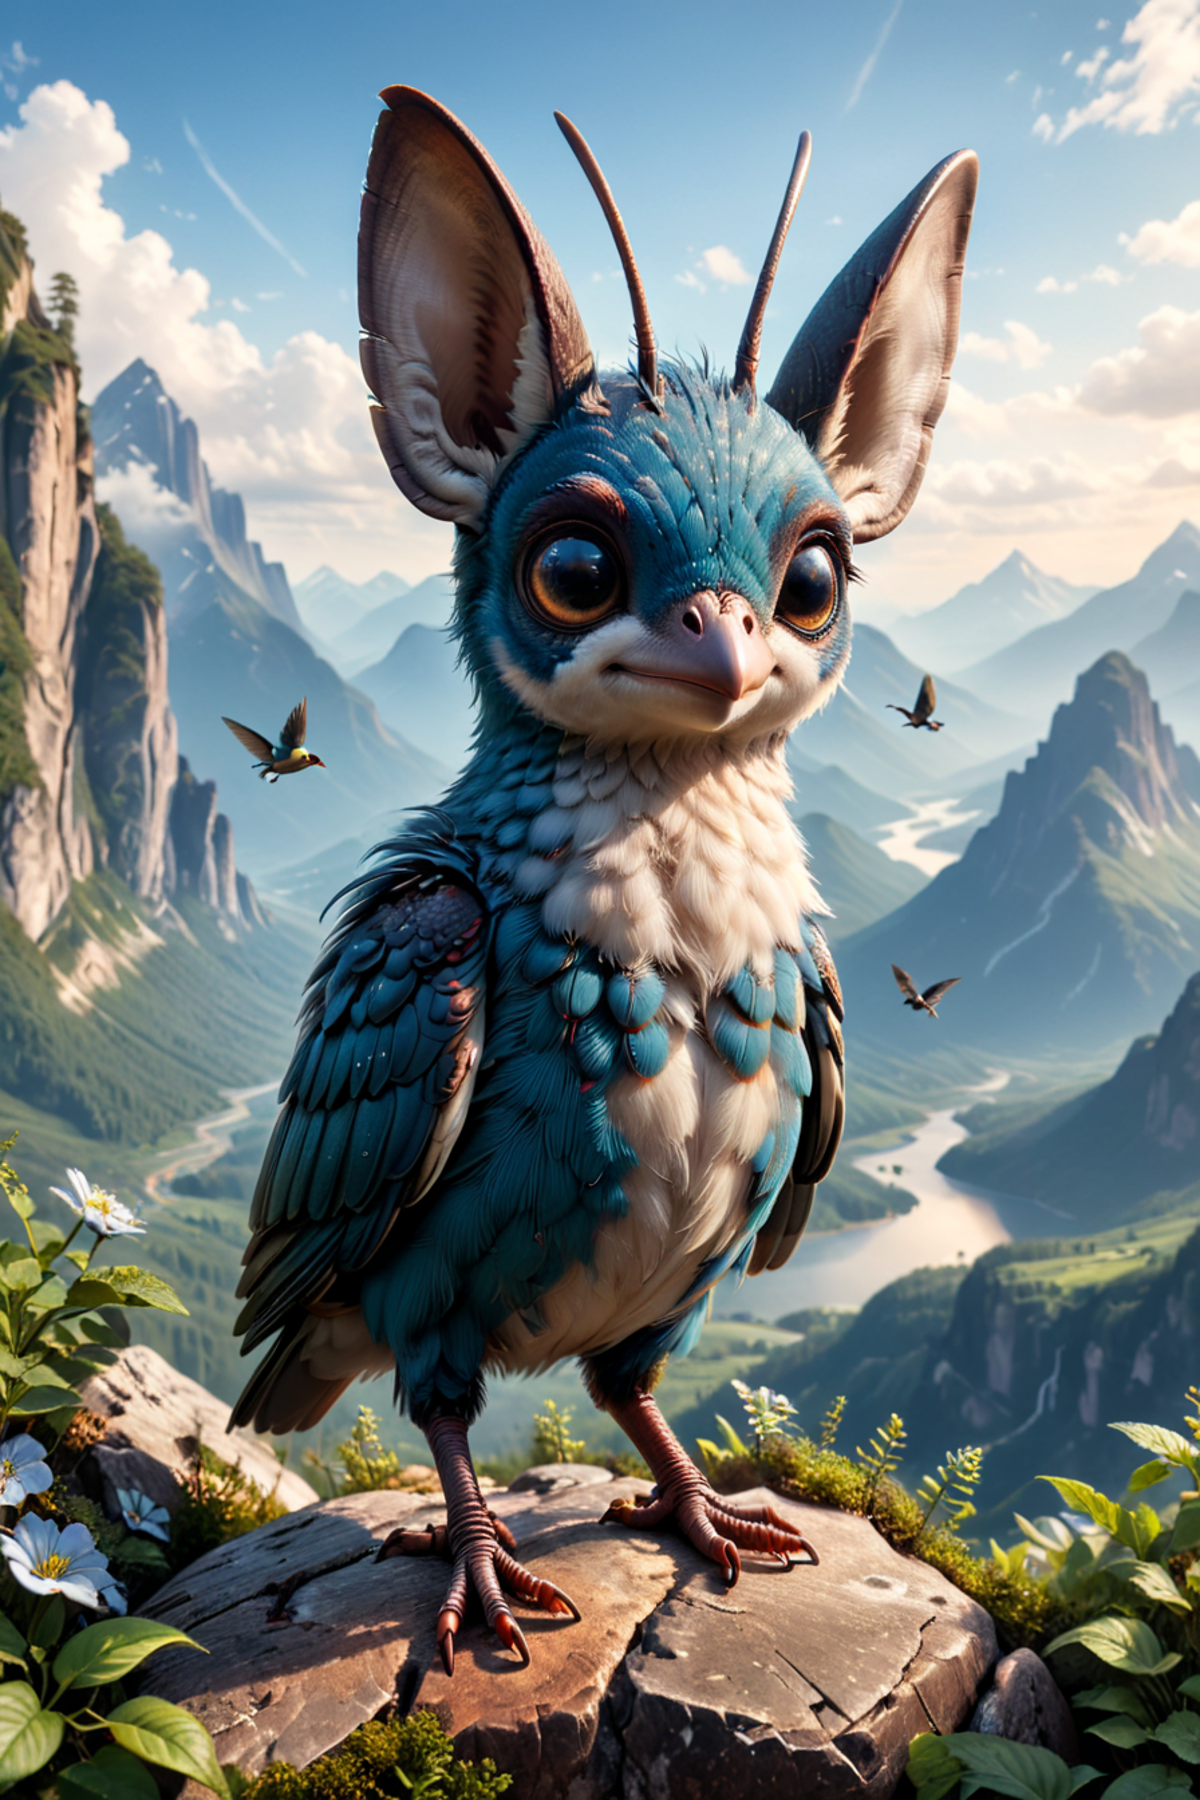 An animated bird with blue and white feathers is standing on a cliff overlooking a valley with a river.